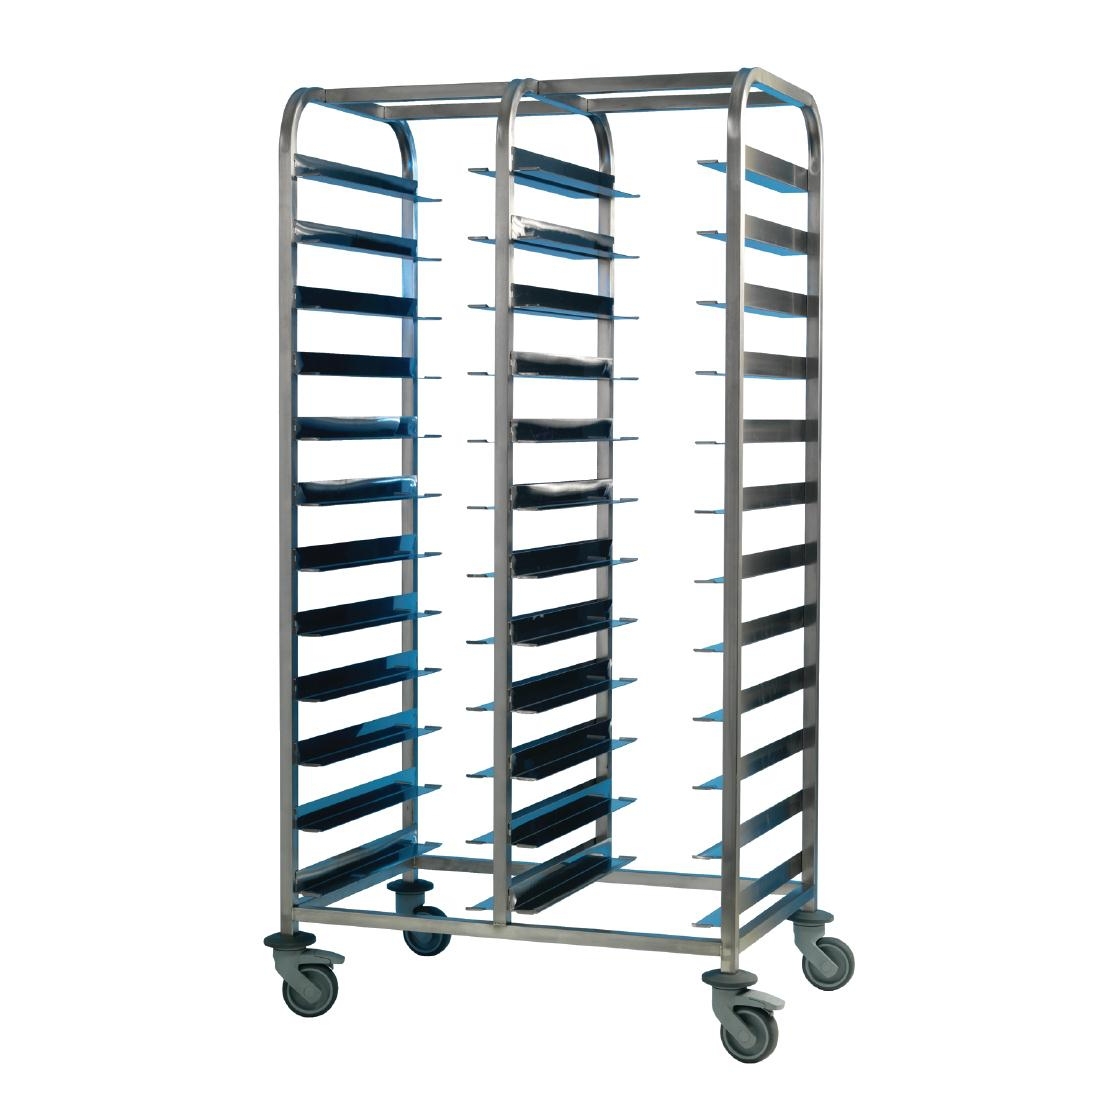 EAIS Stainless Steel Clearing Trolley 24 Shelves